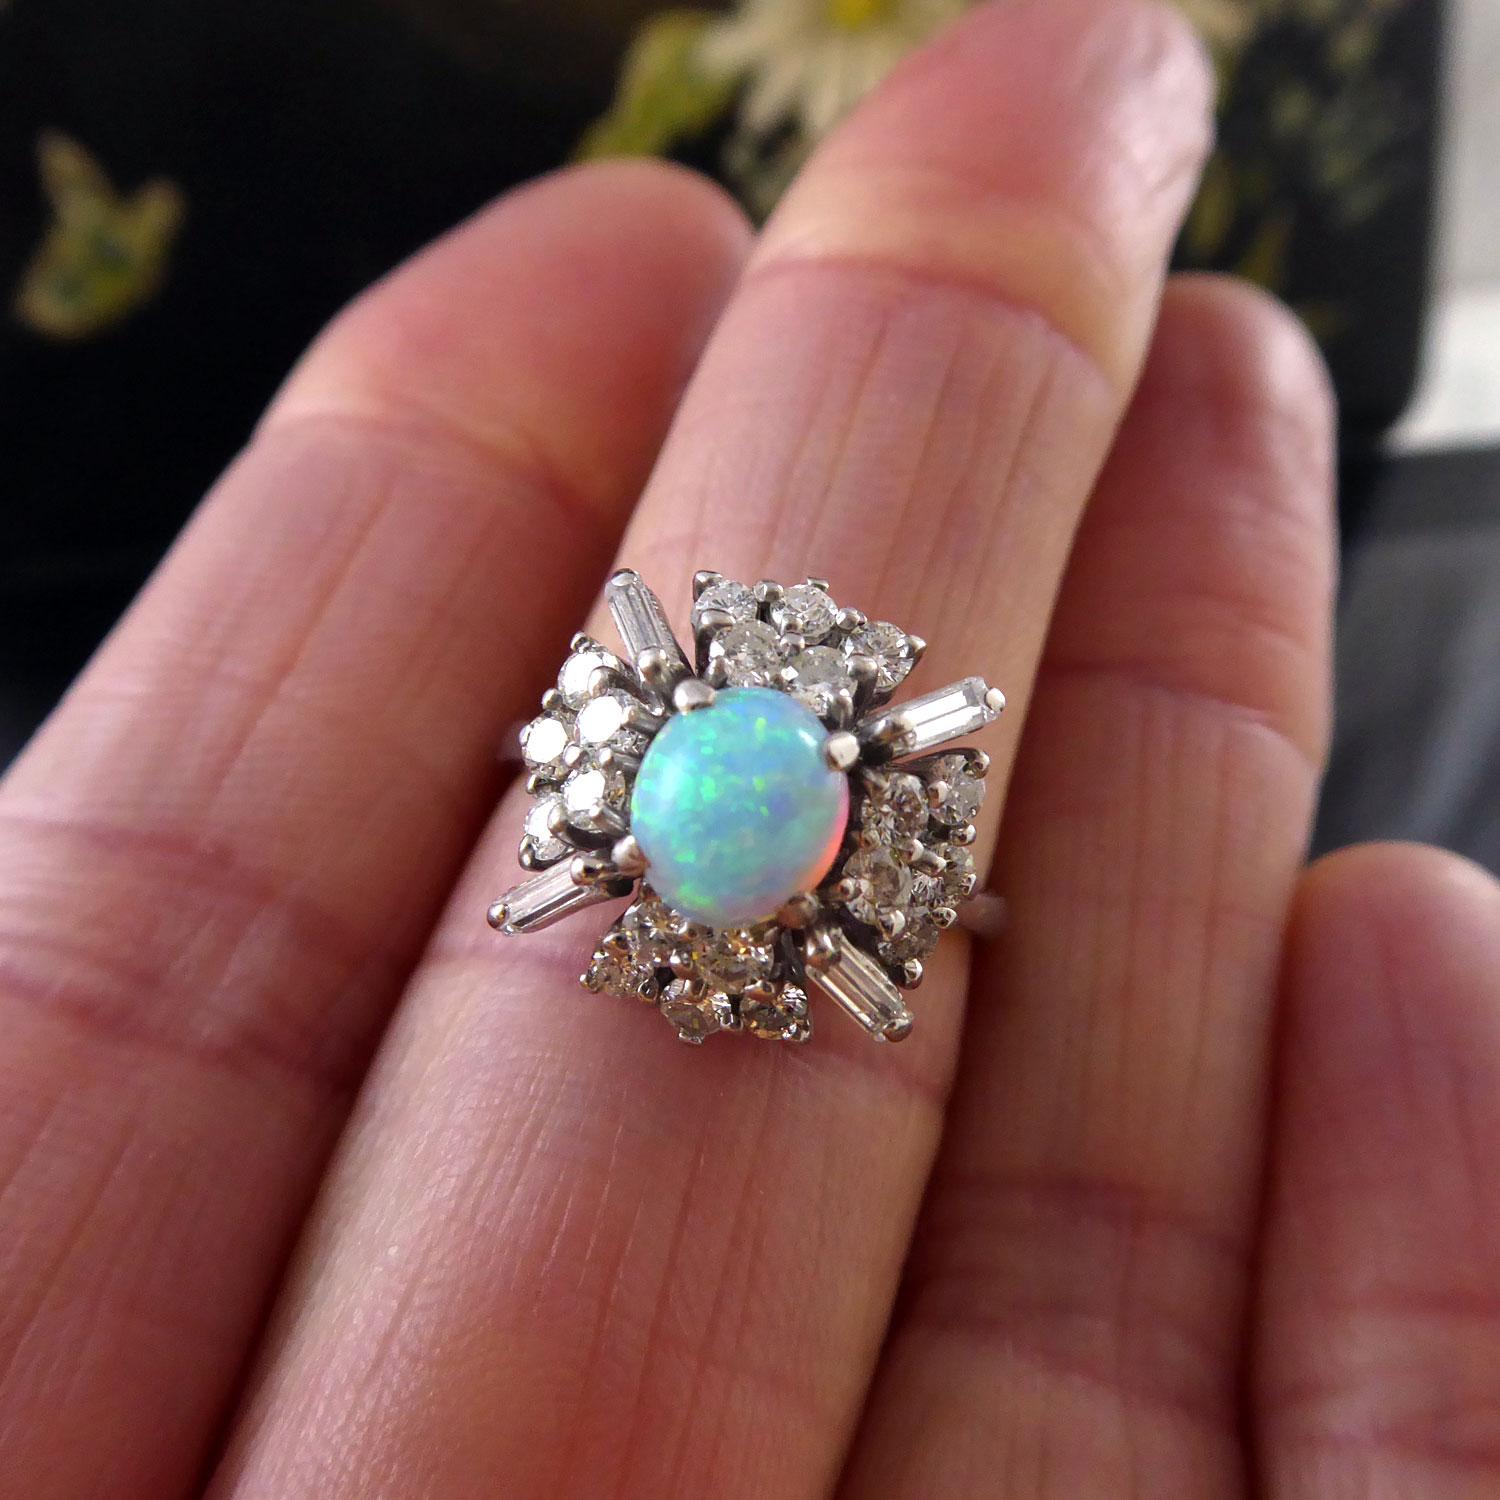 Women's Vintage 0.64 Carat Opal and Diamond Cluster Ring, White Gold, Mid-20th Century